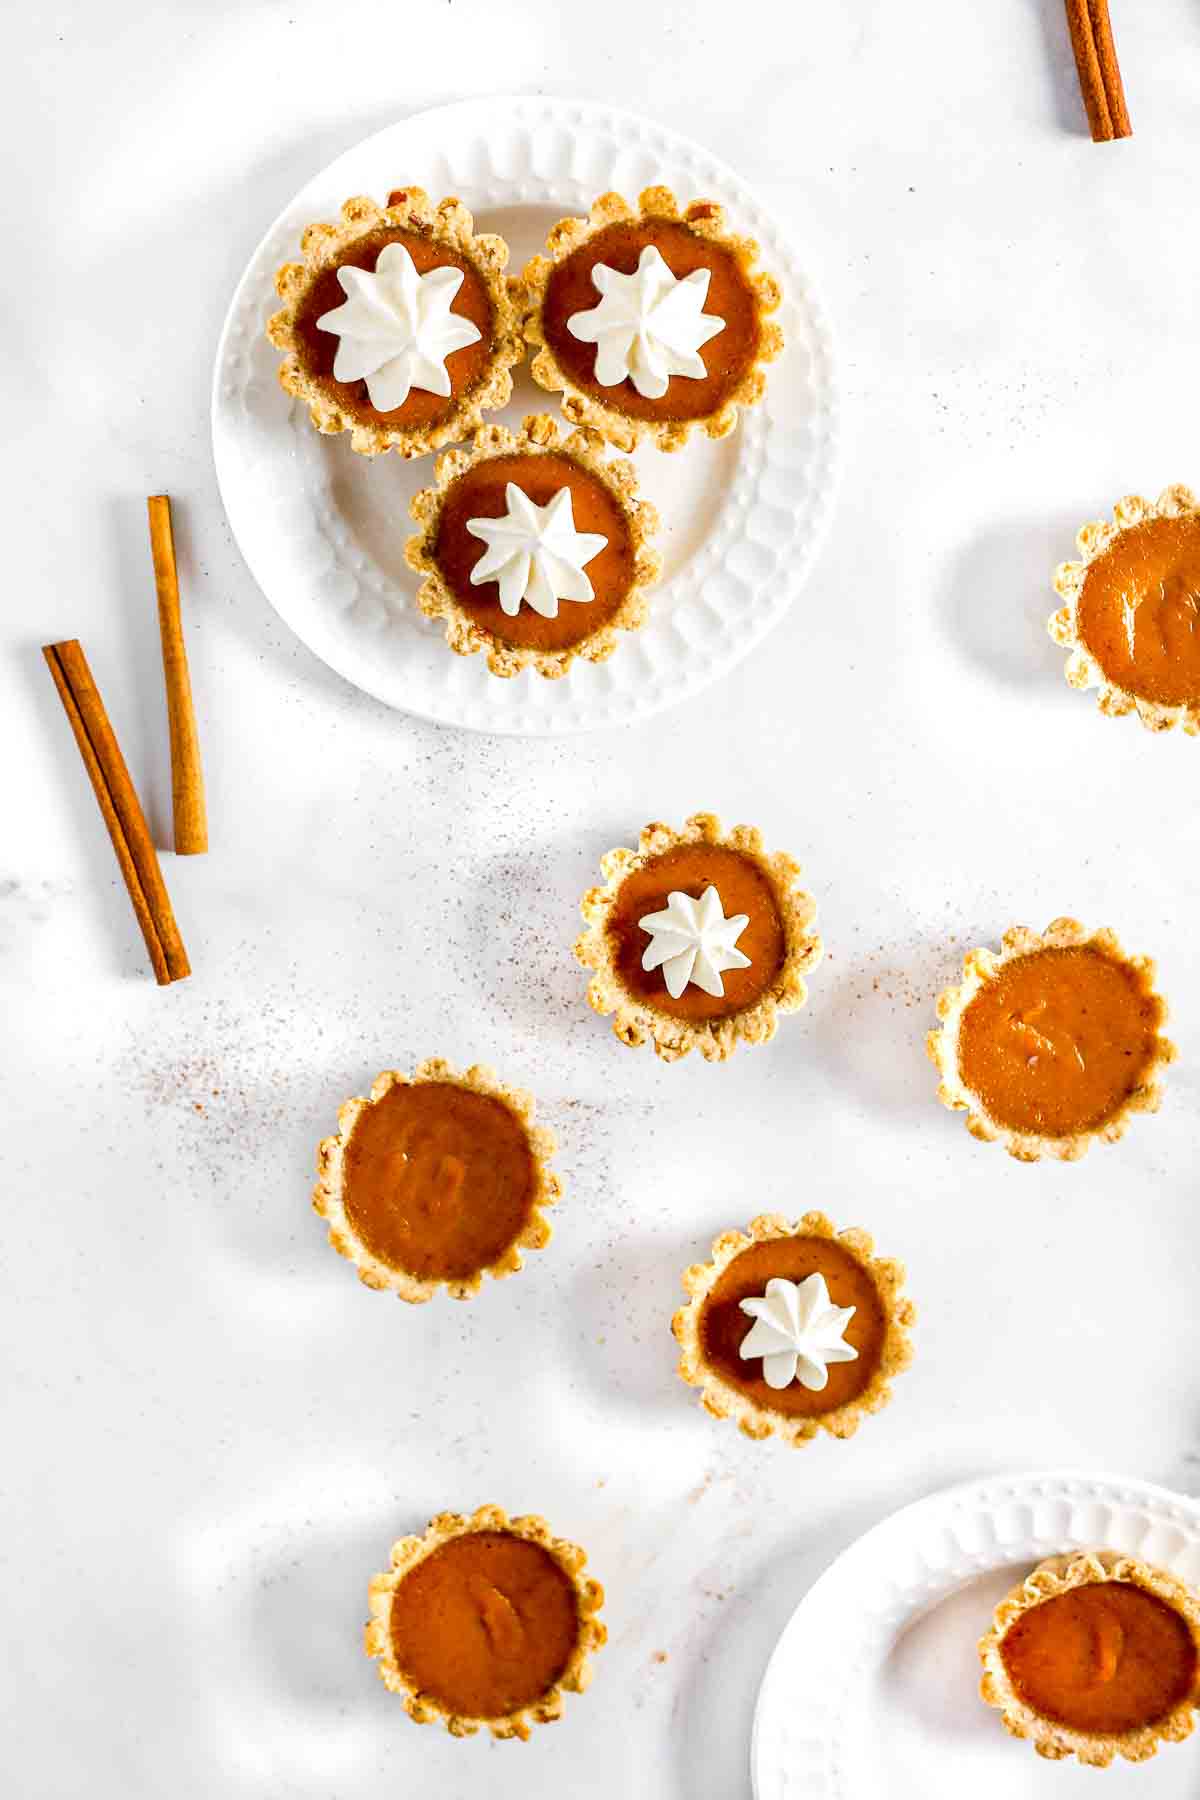 Mini pumpkin pies tarts on table with cinnamon and whipped cream.